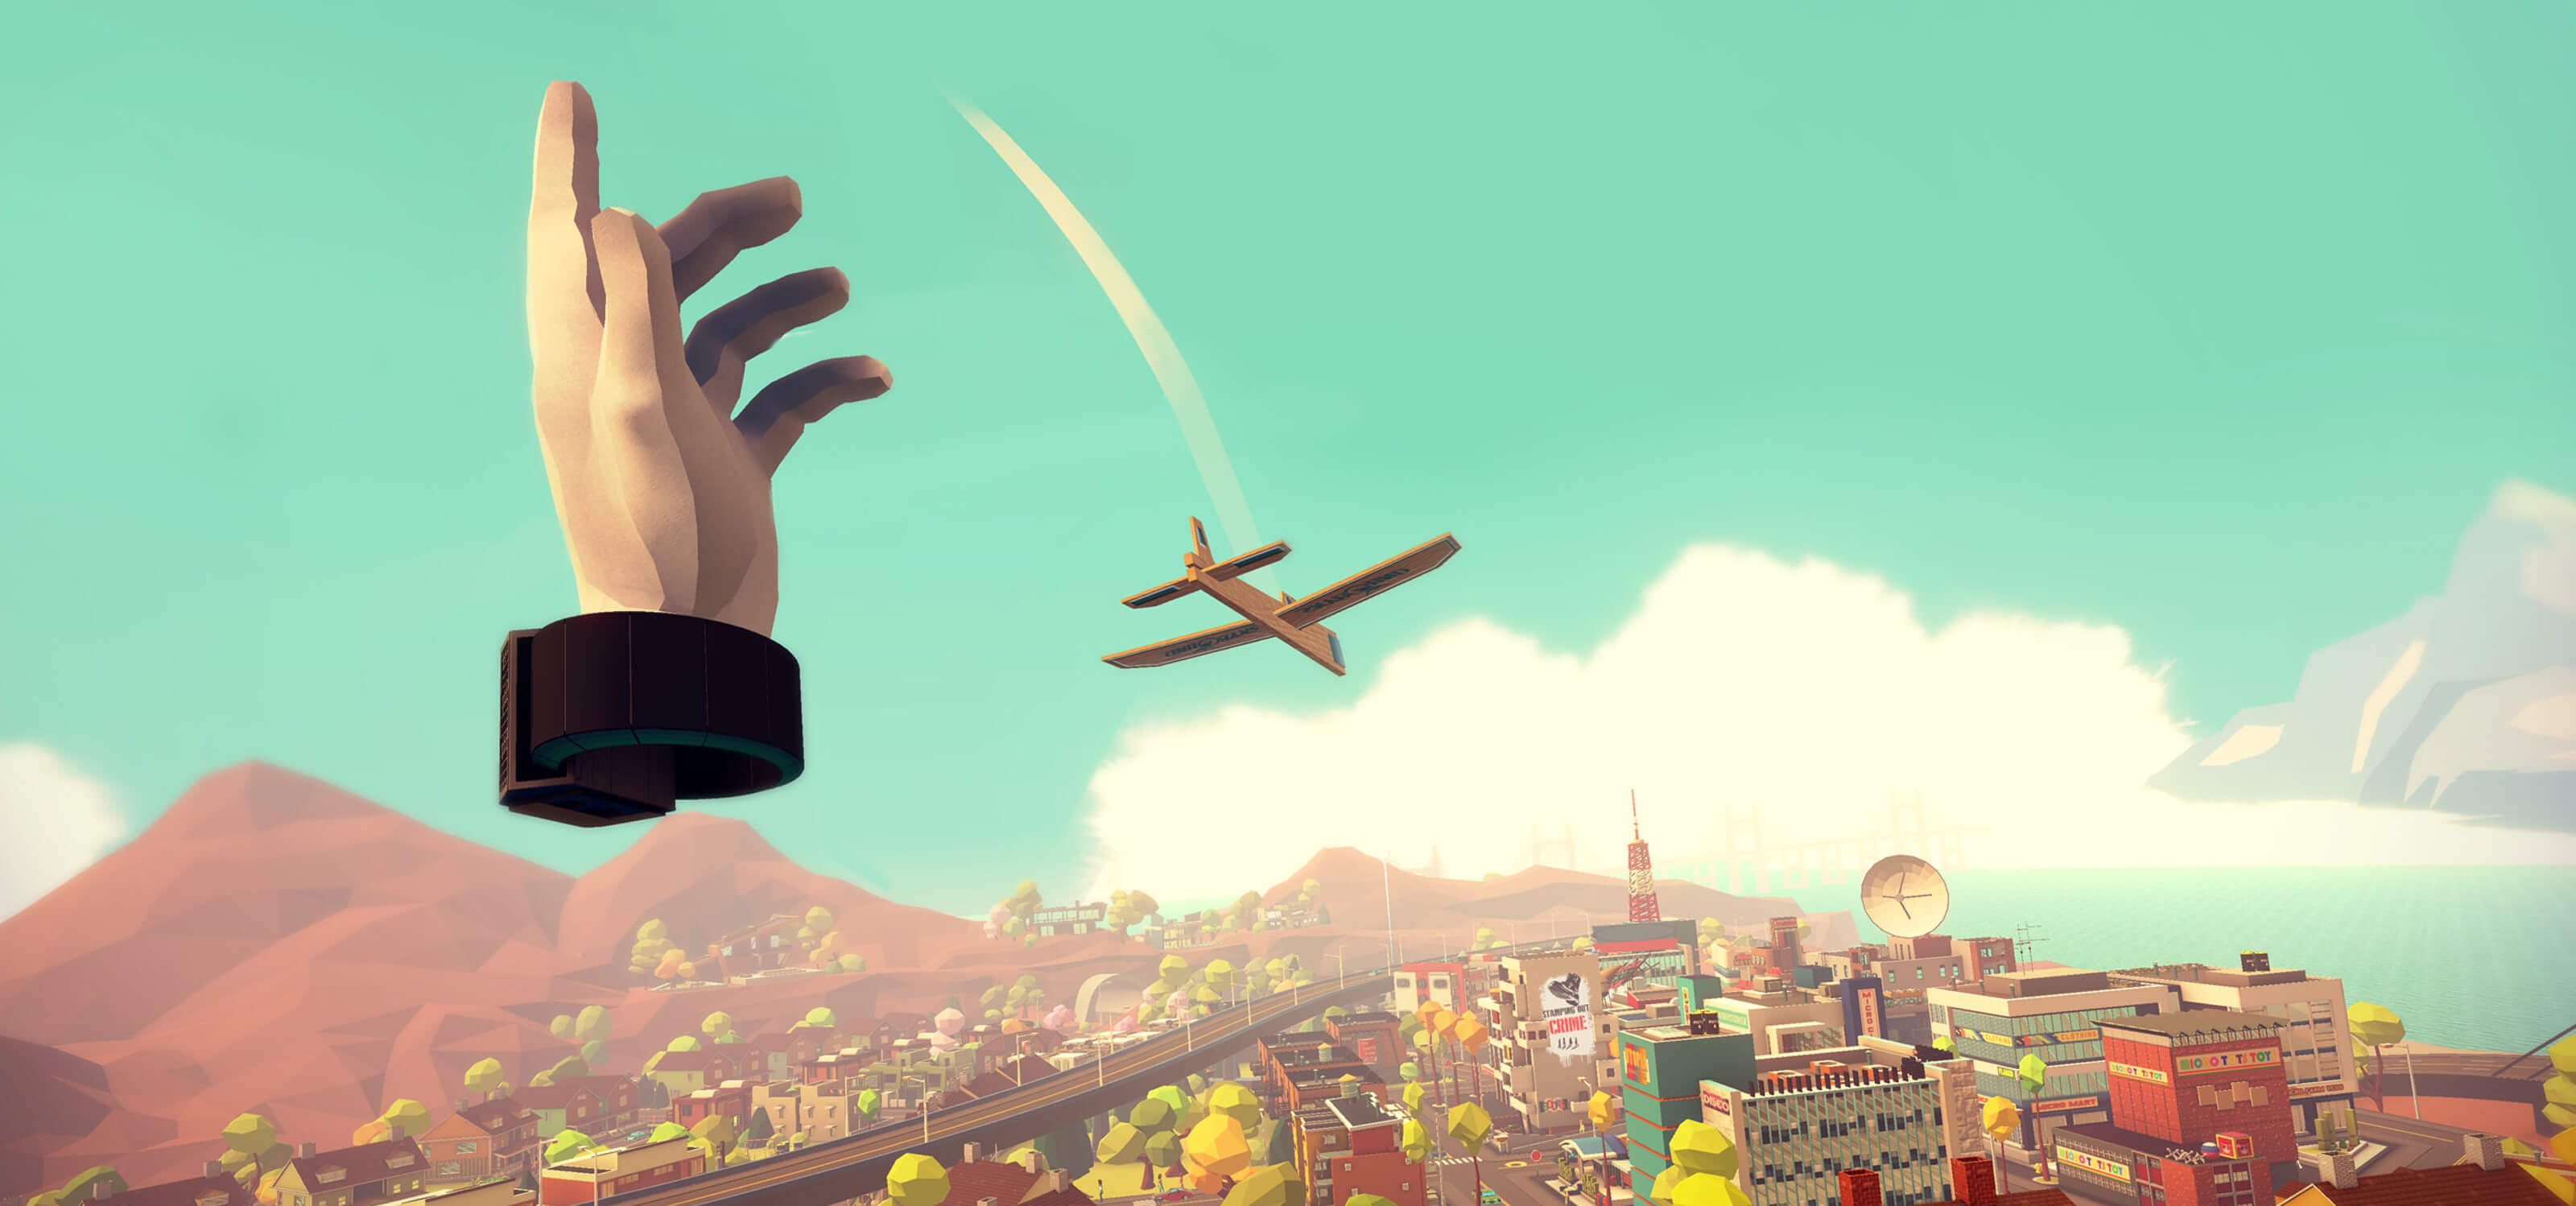 Screenshot from Giant Cop of a huge detached hand flinging a wooden airplane through the air